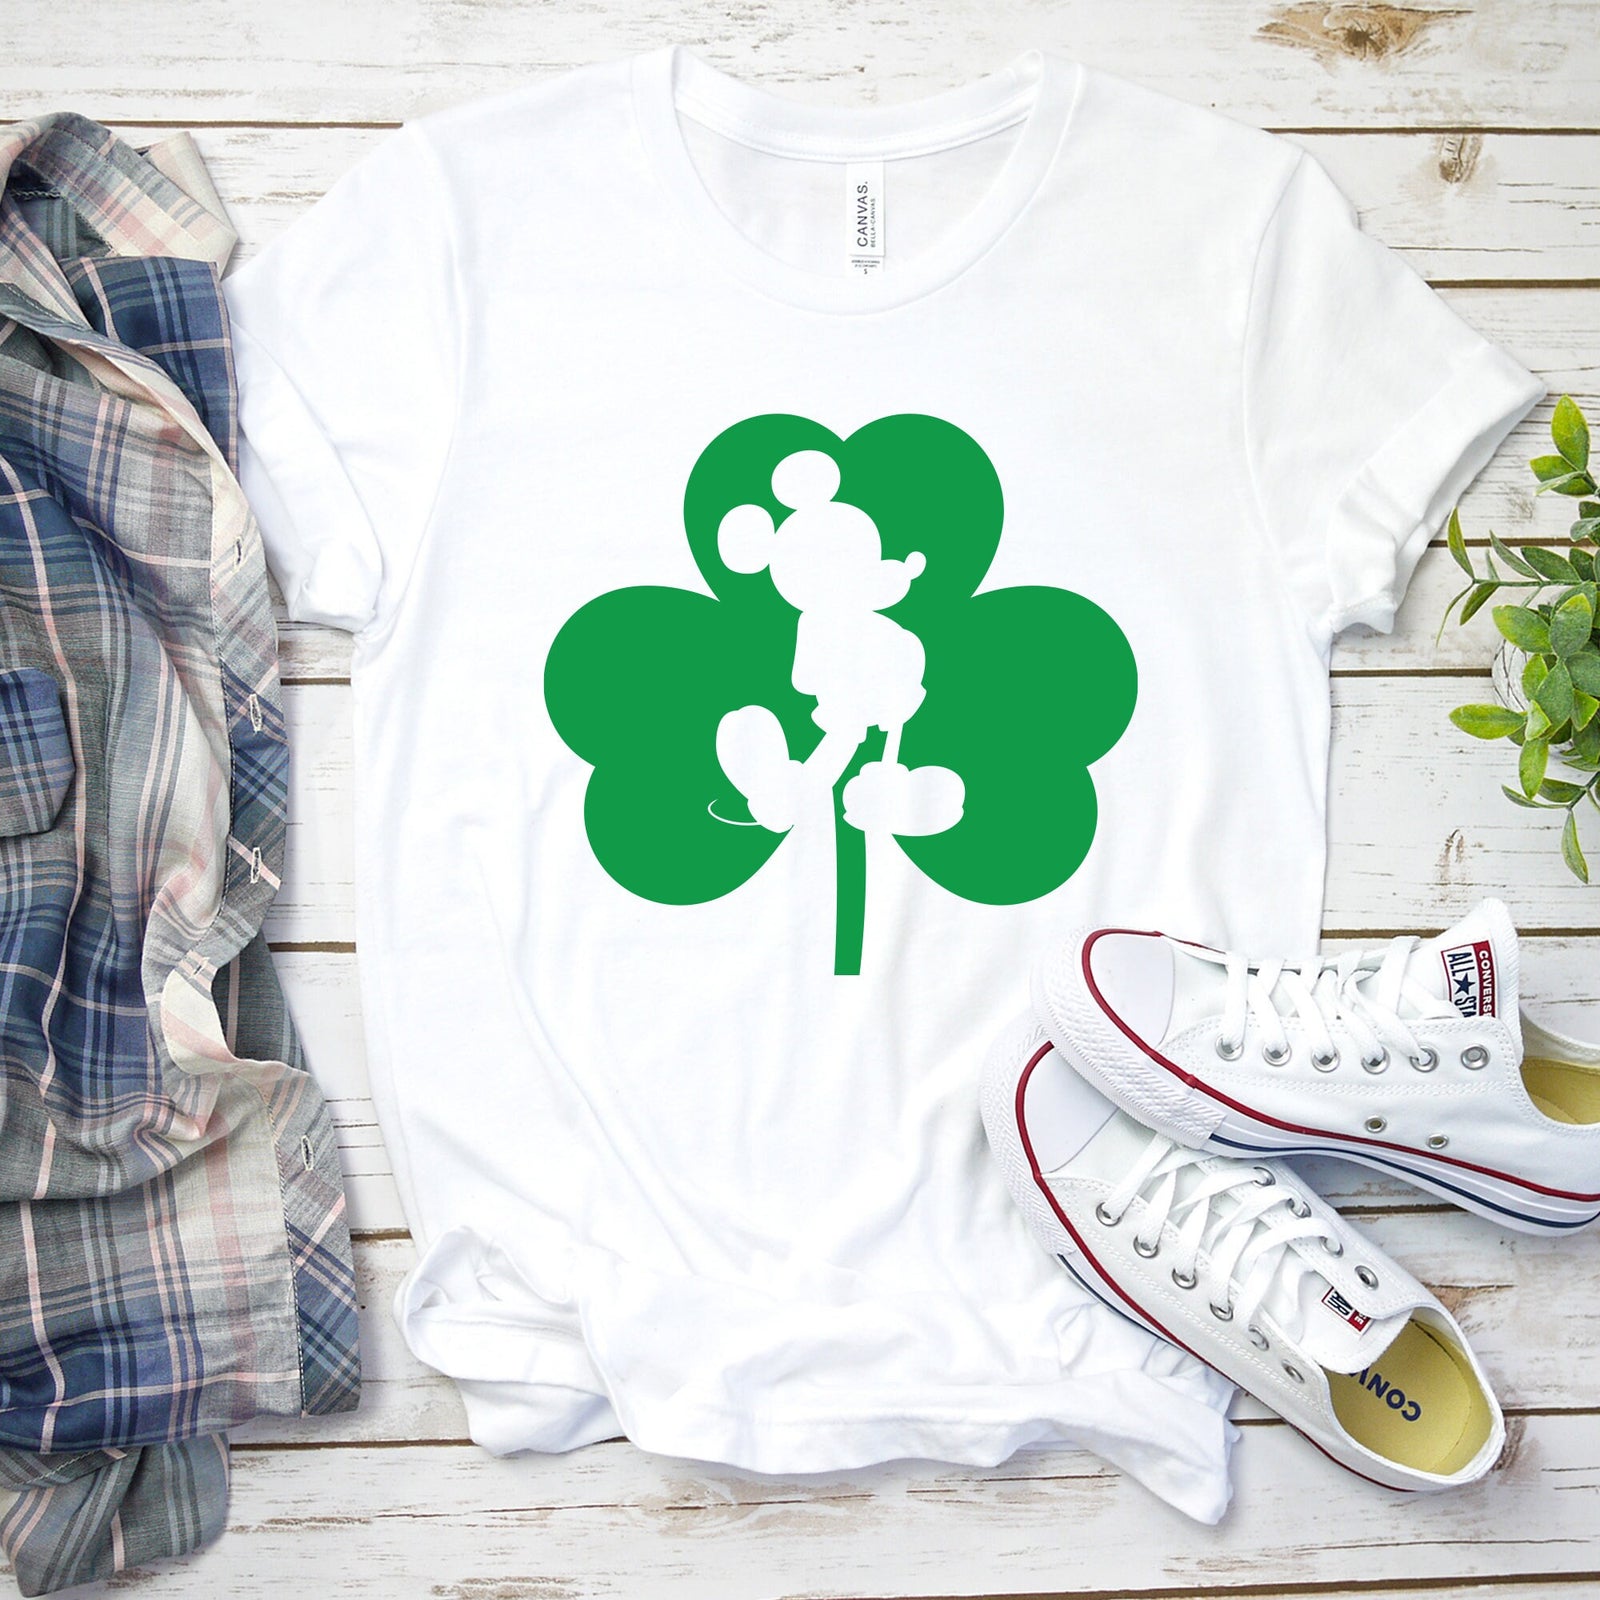 St. Patrick's Day Mickey Mouse T Shirt- Outline Silhouette inside Shamrock - Clover - Lucky Mickey - Disney St. Patty's Day